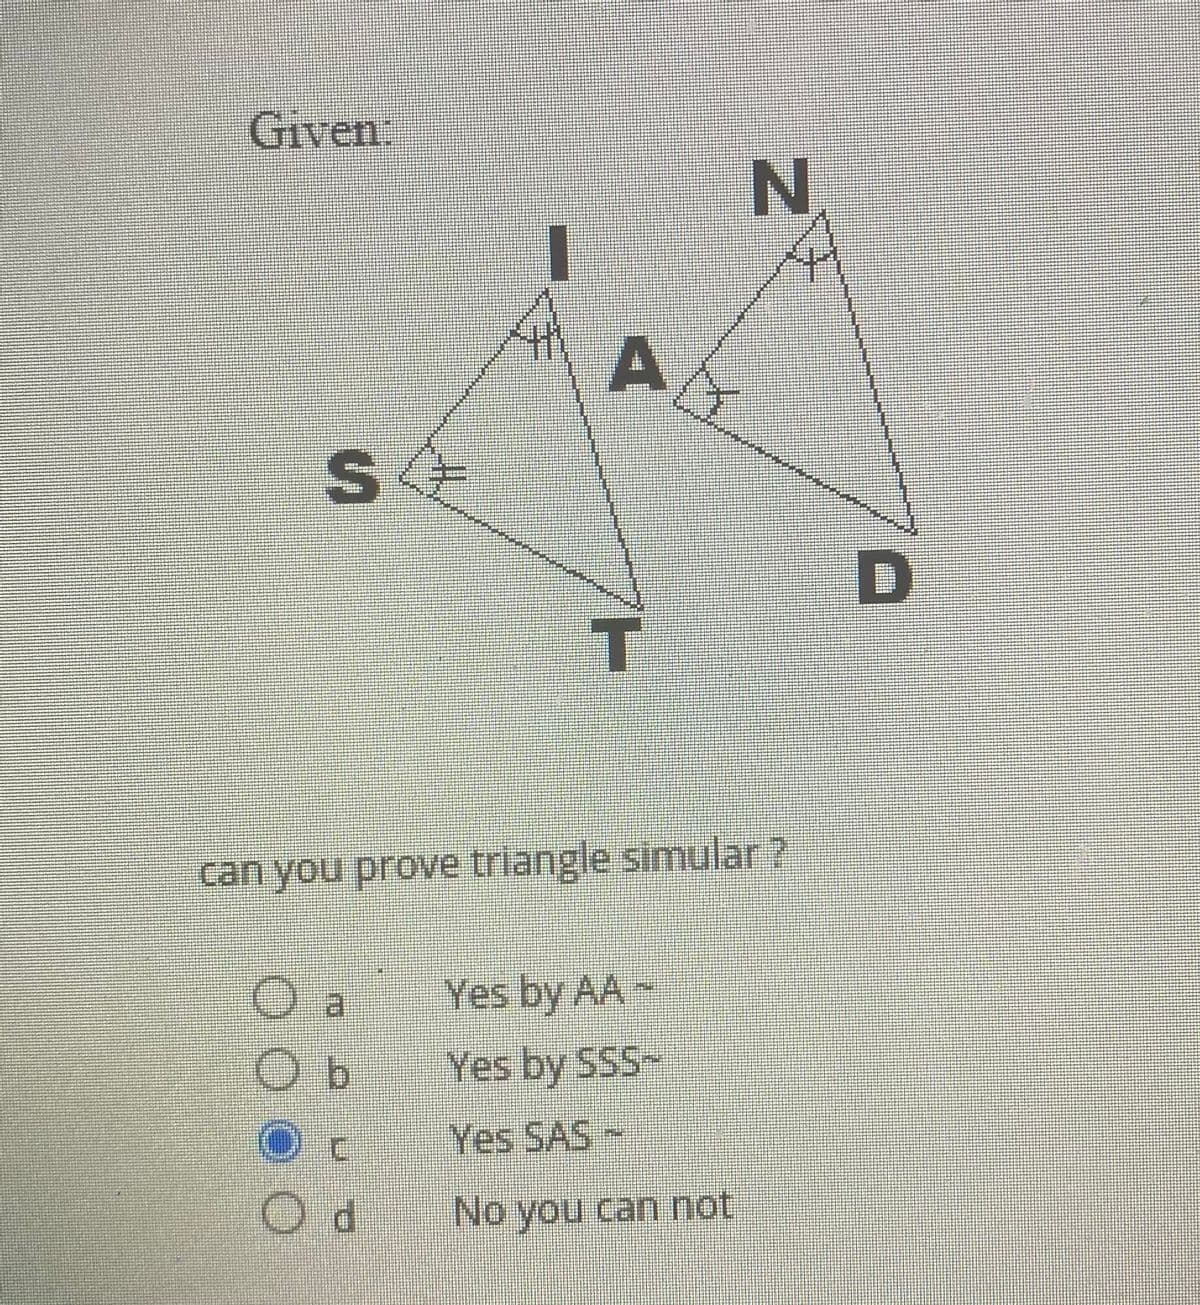 Given:
S
T
can you prove triangle simular?
O a
Yes by AA -
Ob
9.
Yes by SSS-
Yes SAS-
Od
No you can not
D.
